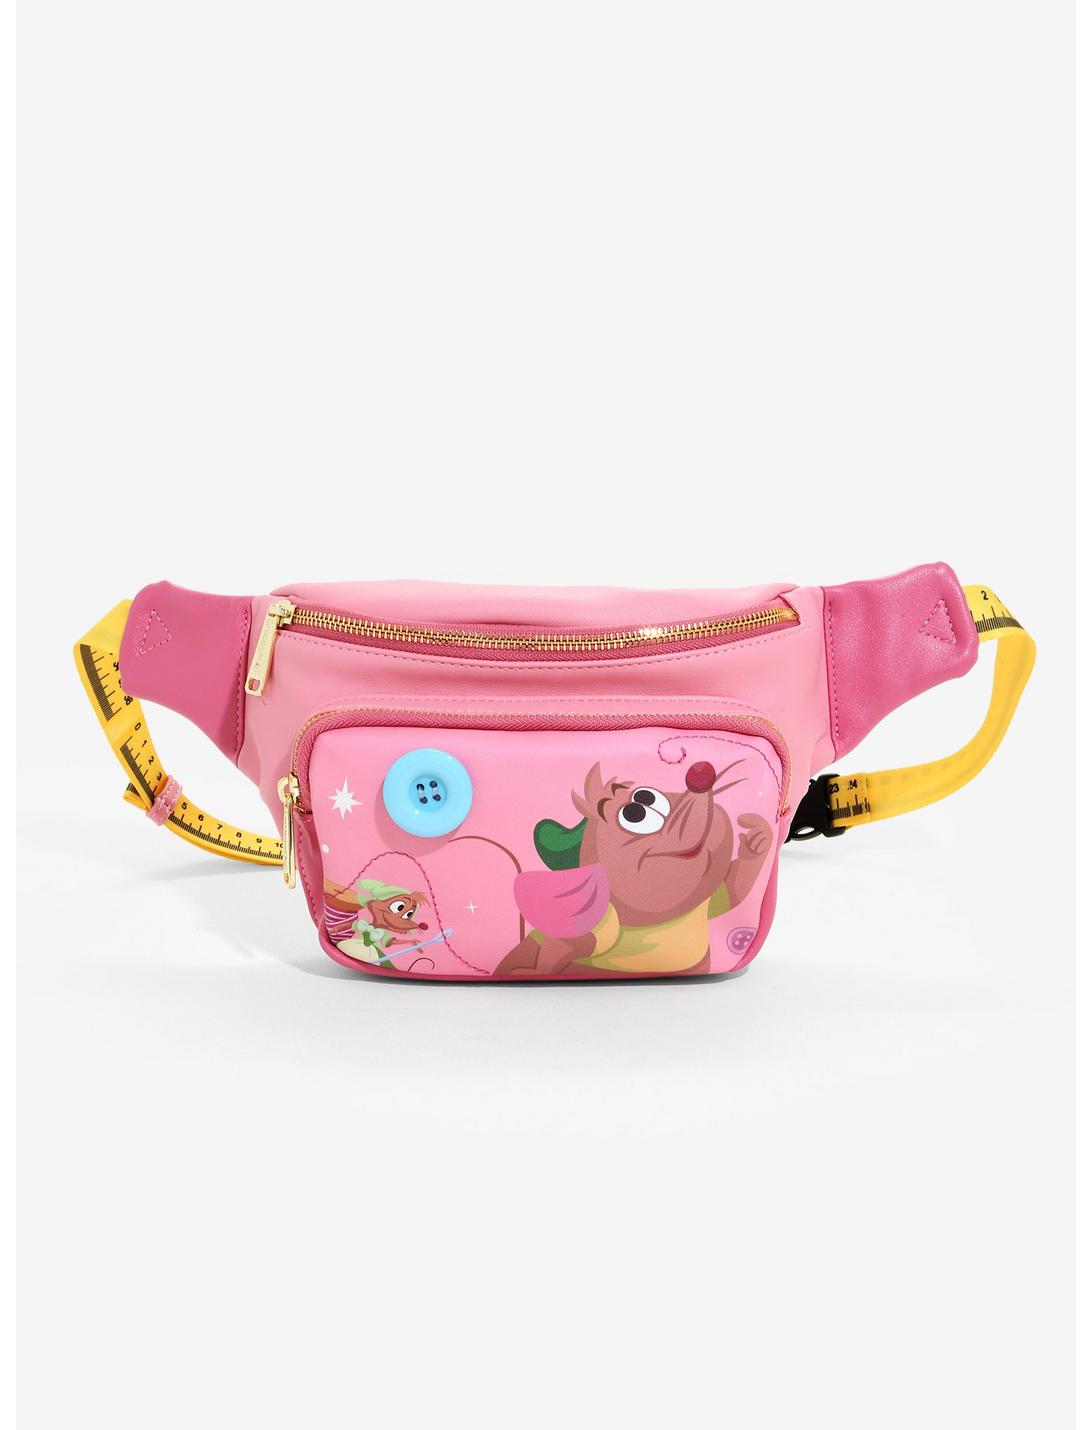 Loungefly Disney Cinderella Gus Gus Fanny Pack - BoxLunch Exclusive, , hi-res